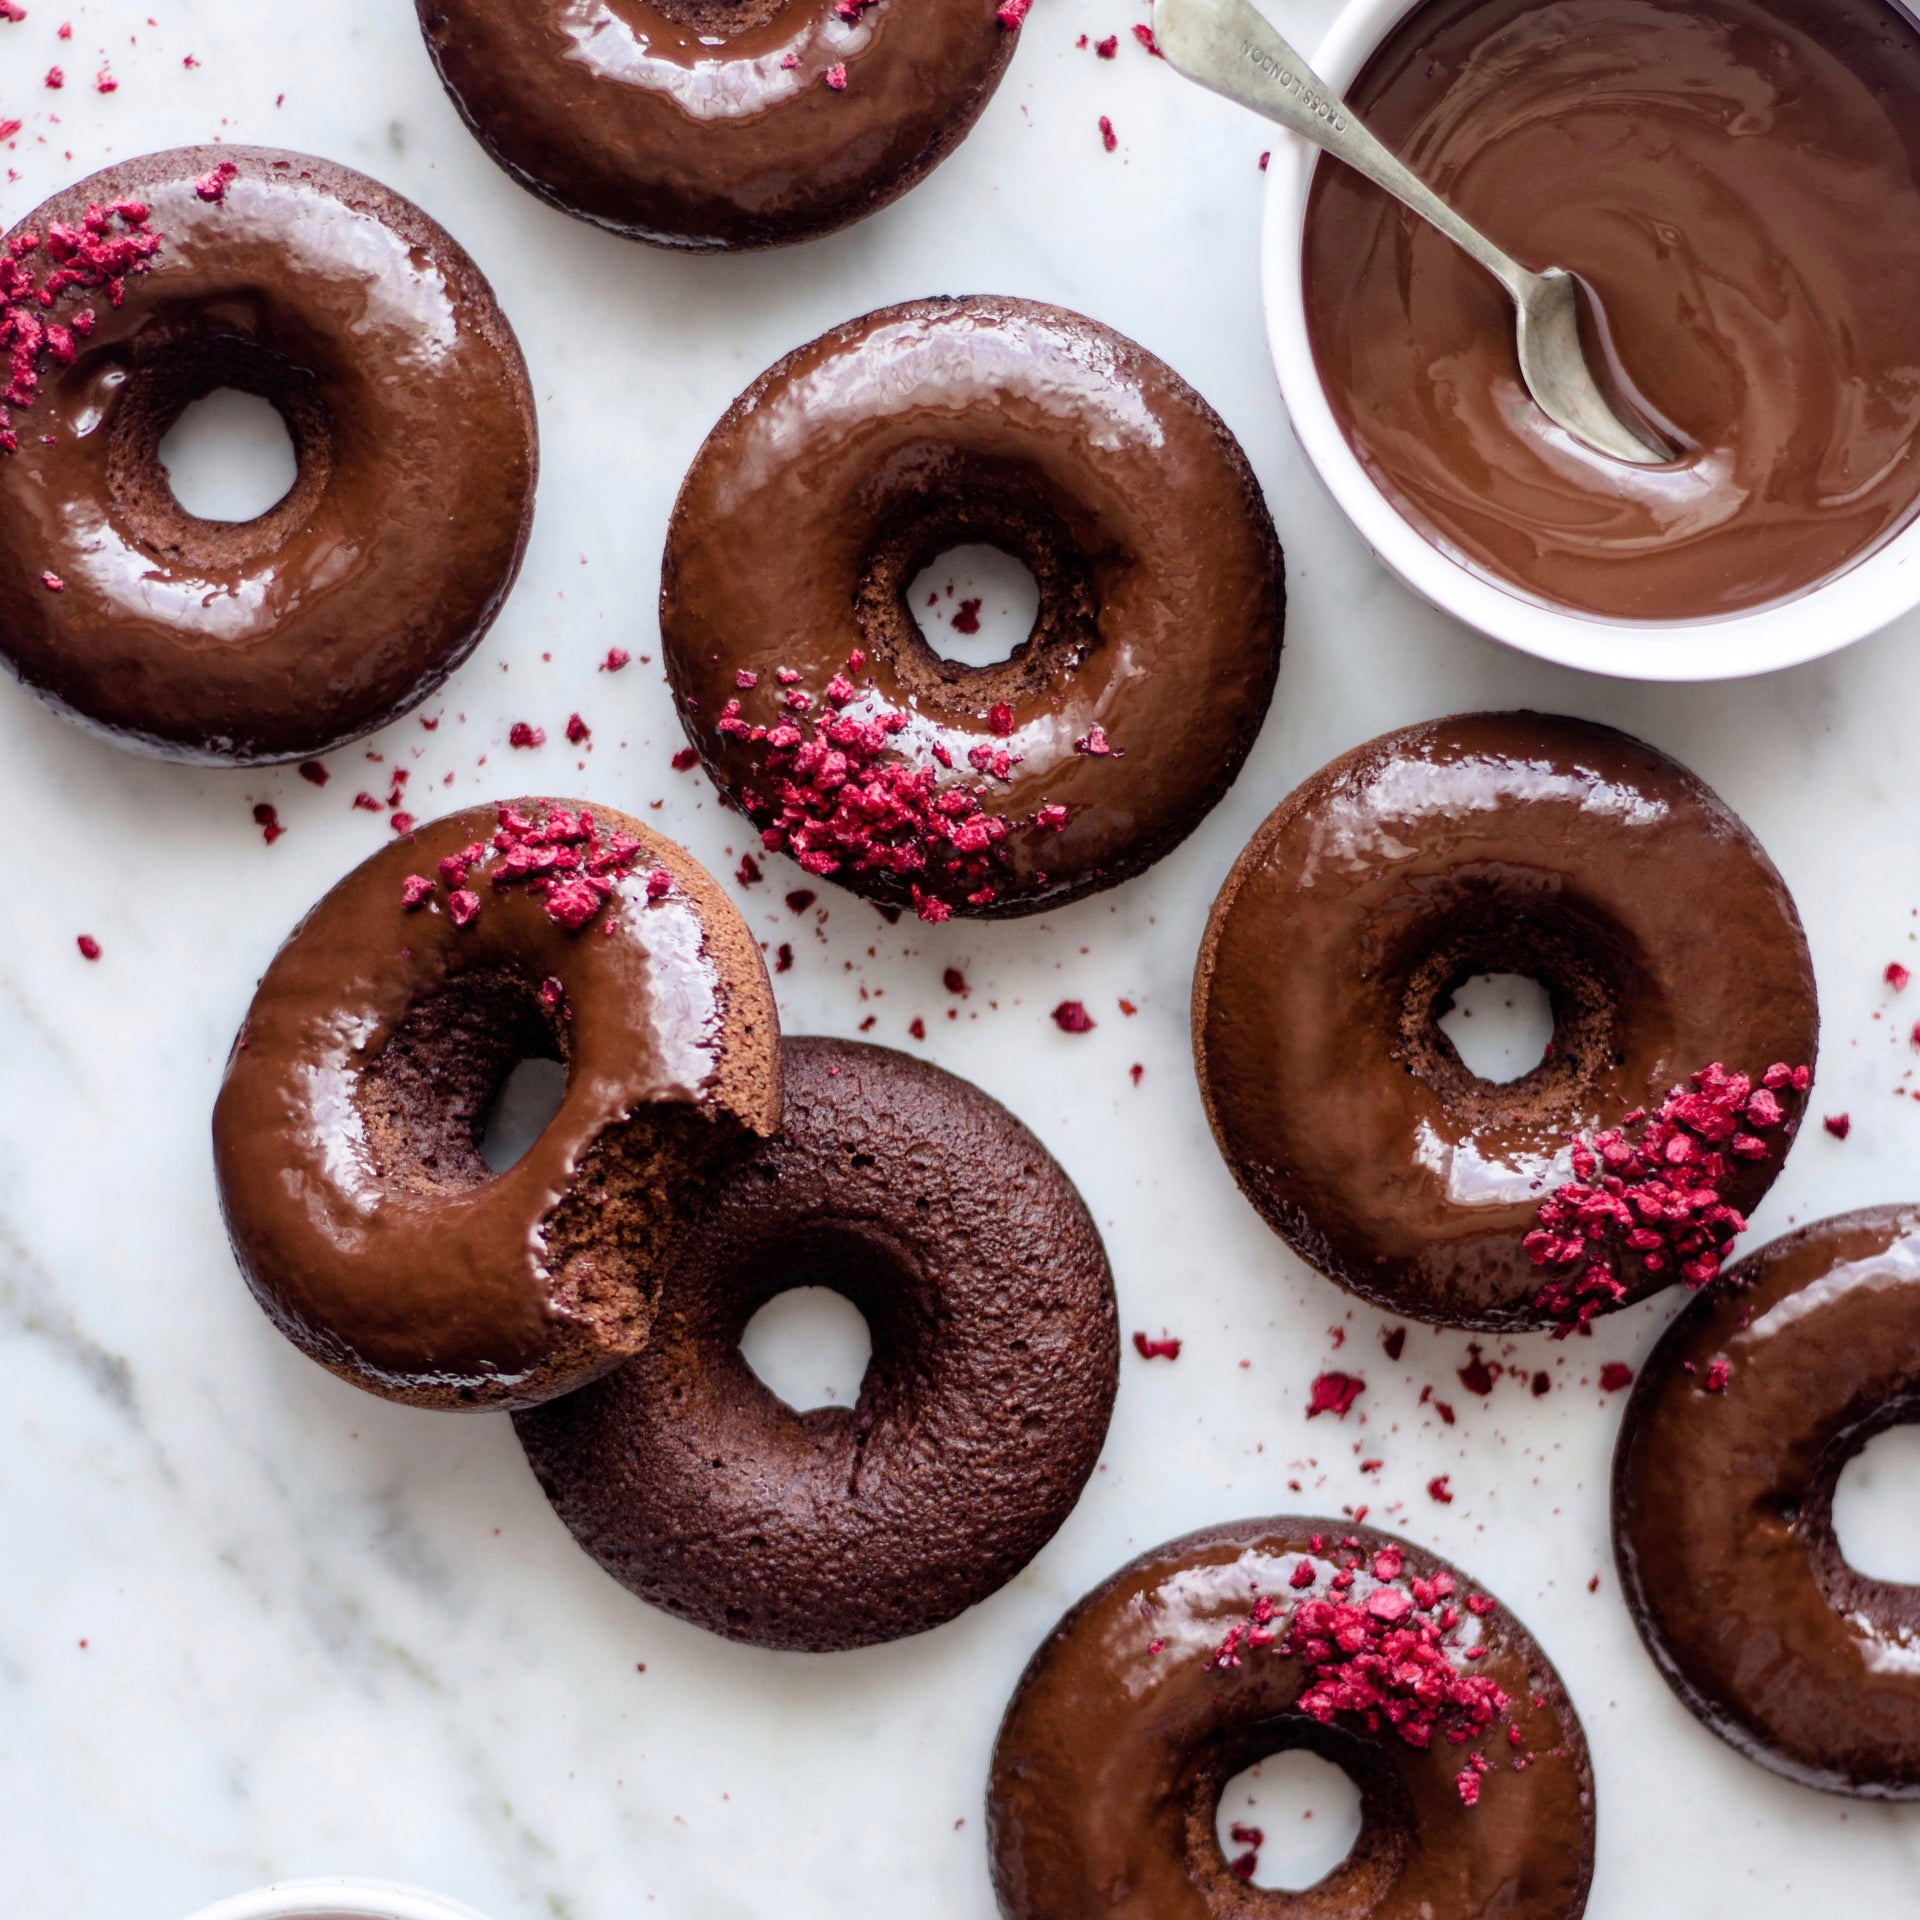 chocolate donuts, made with earhtnutri gluten-free All purpose flour